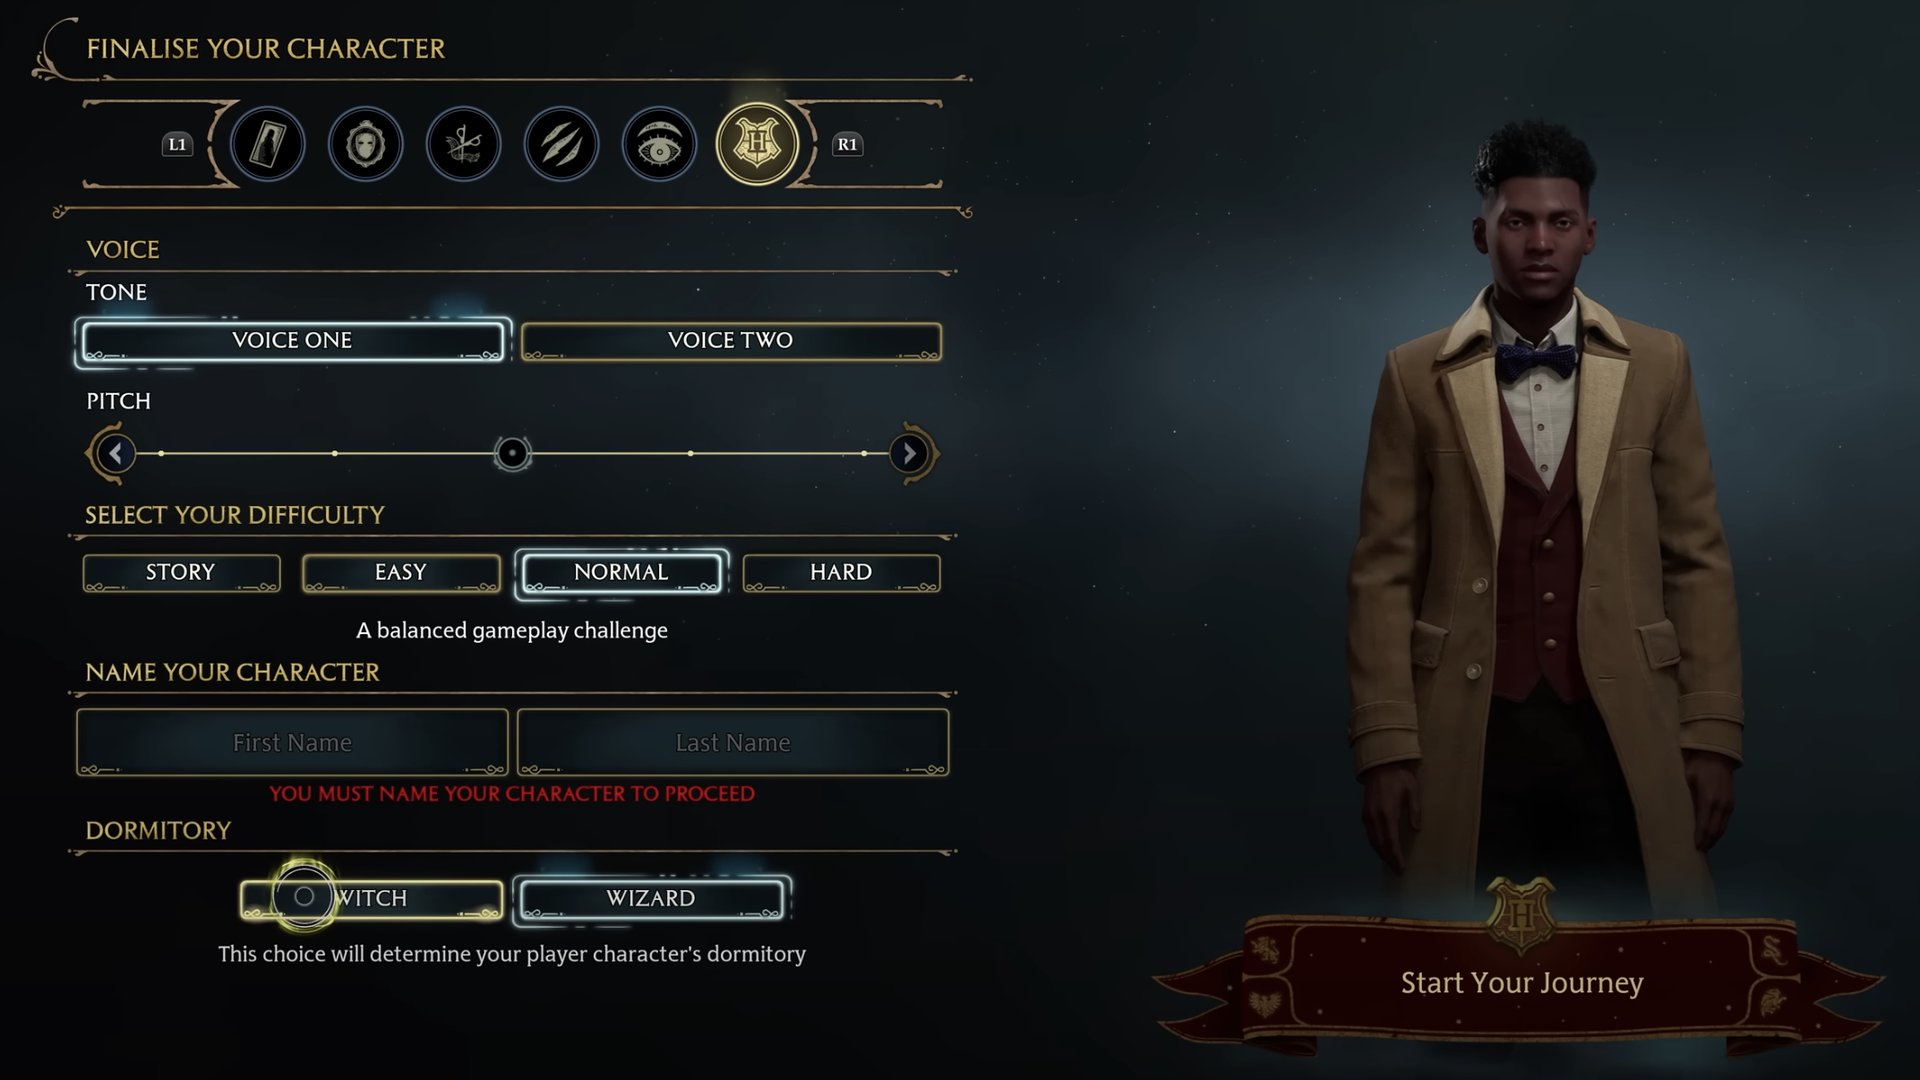 Screenshot of the character creation tools in Hogwarts Legacy, including options to customize voice and where the character dorms